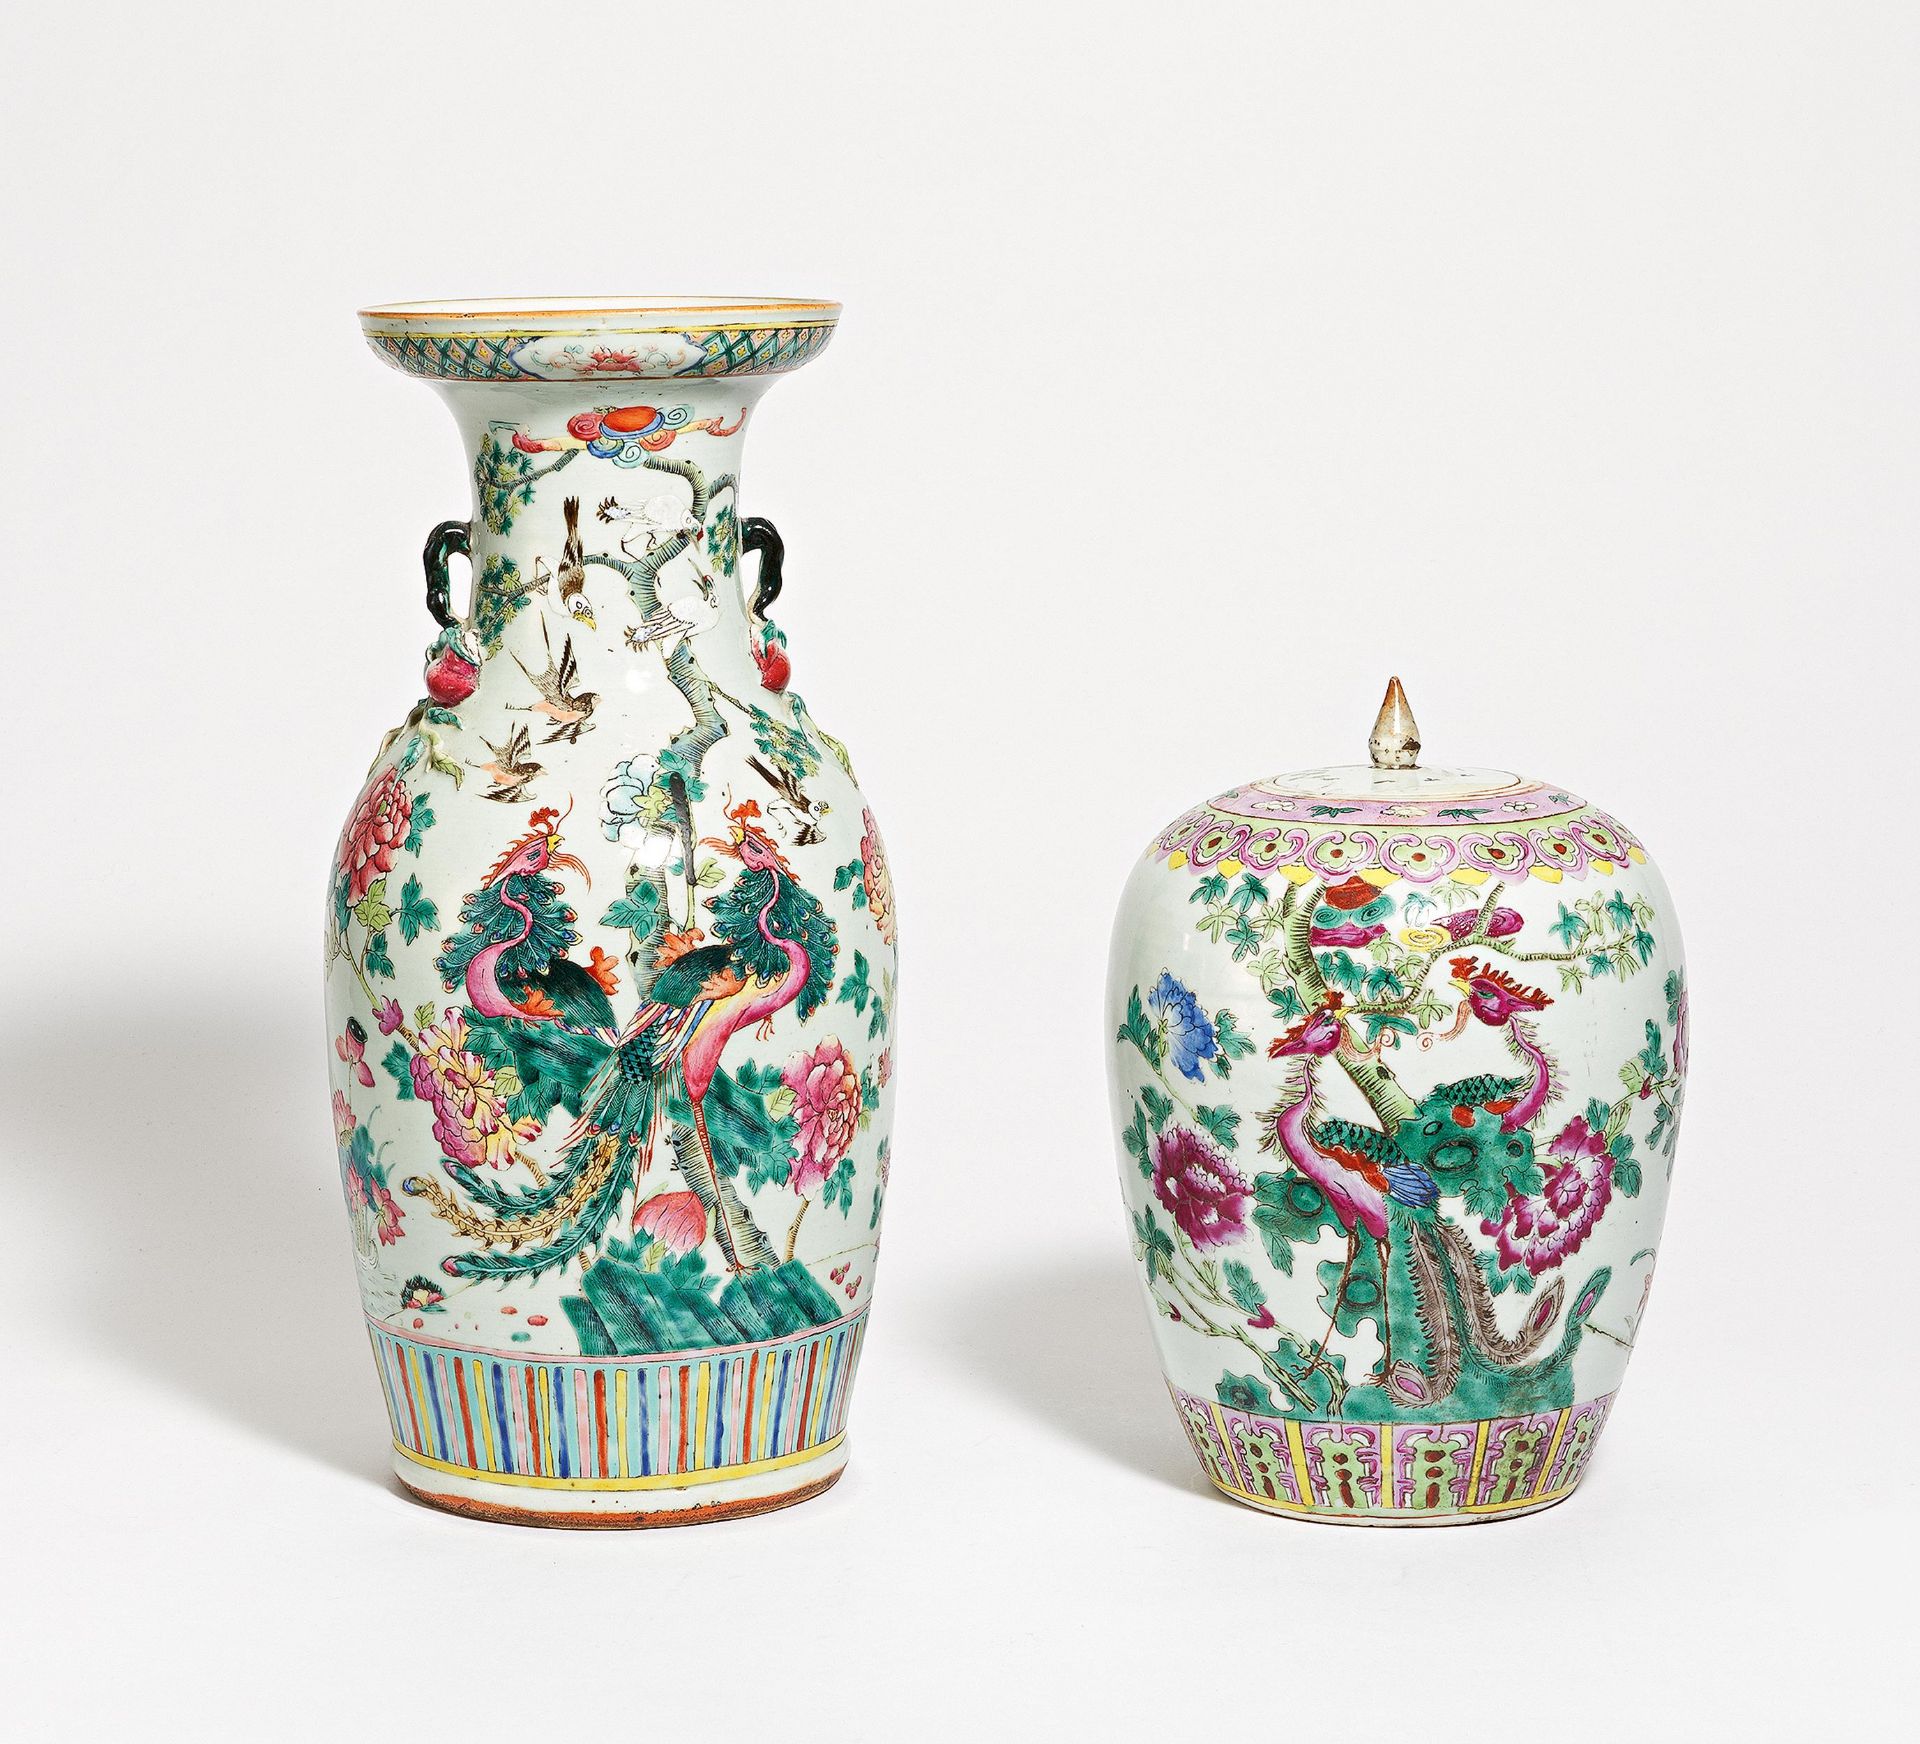 VASE AND LIDDED JAR WITH PHOENIX PAIR. China. 19th-20th c. Porcelain famille rose. Vase with the